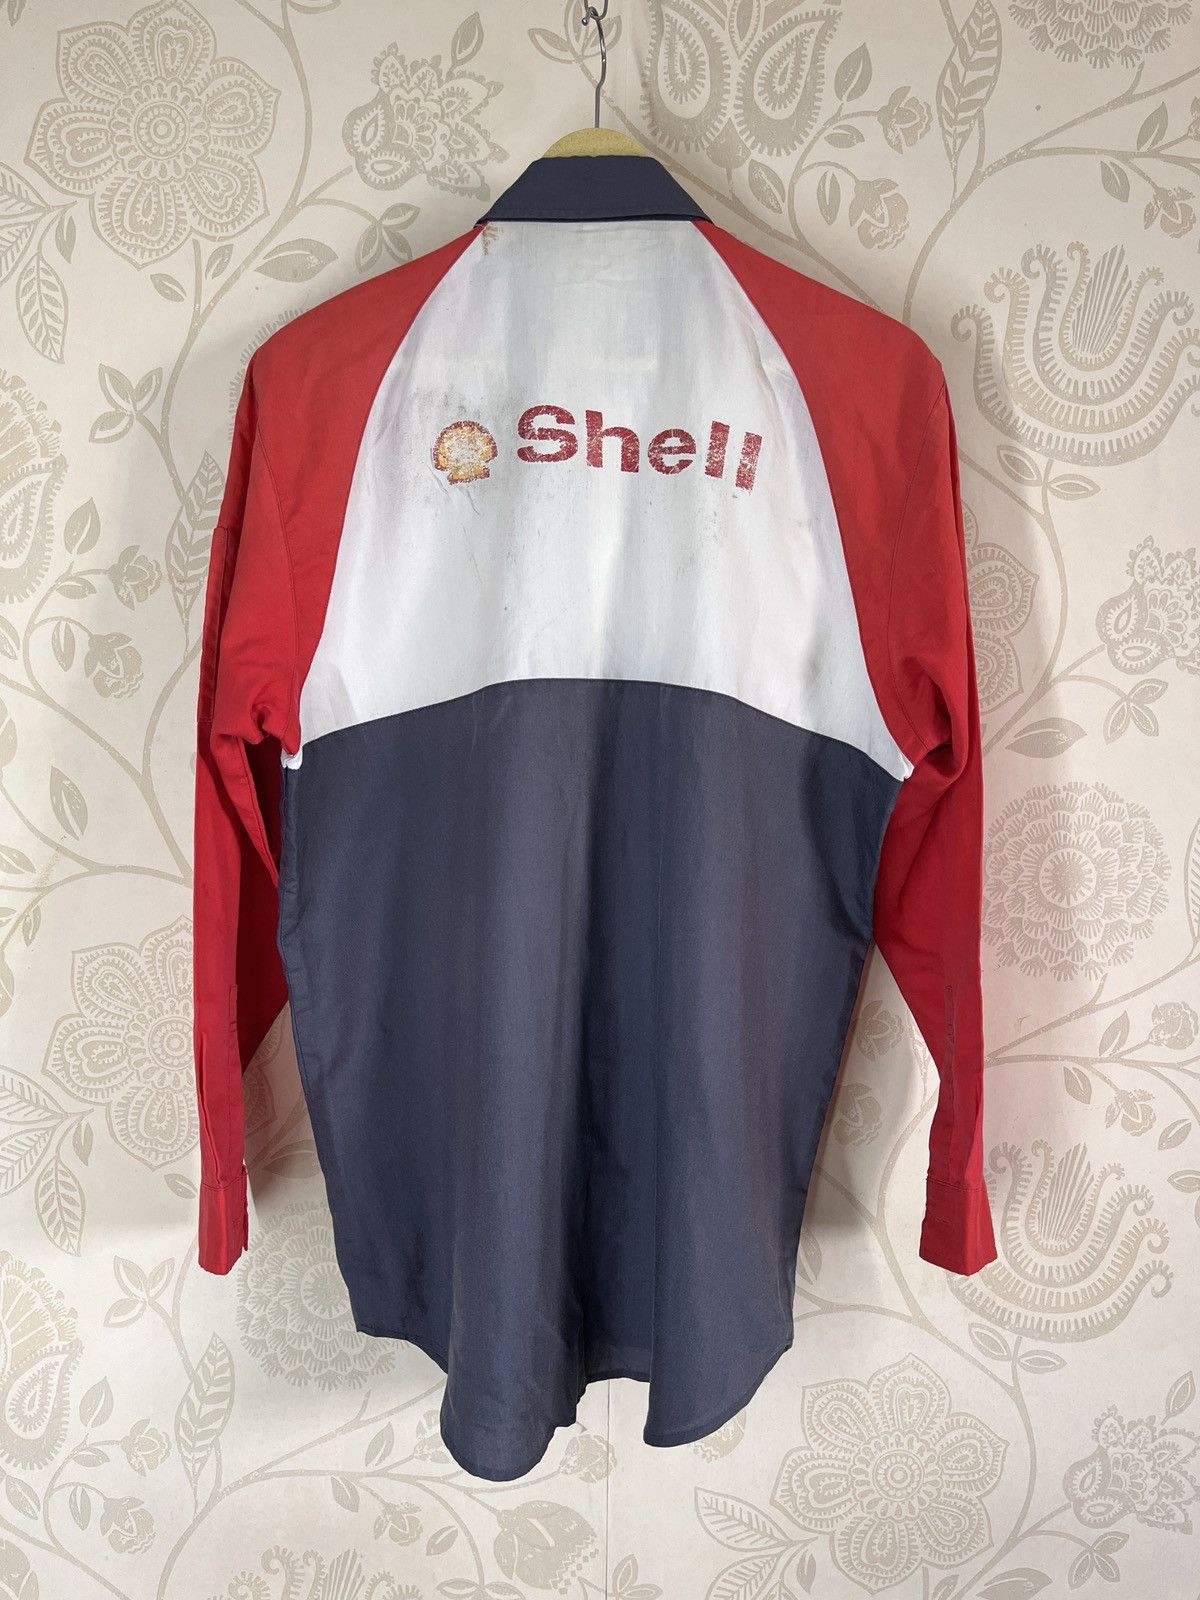 Shell Uniform Workers Vintage Japanese Outlet 1990s - 18